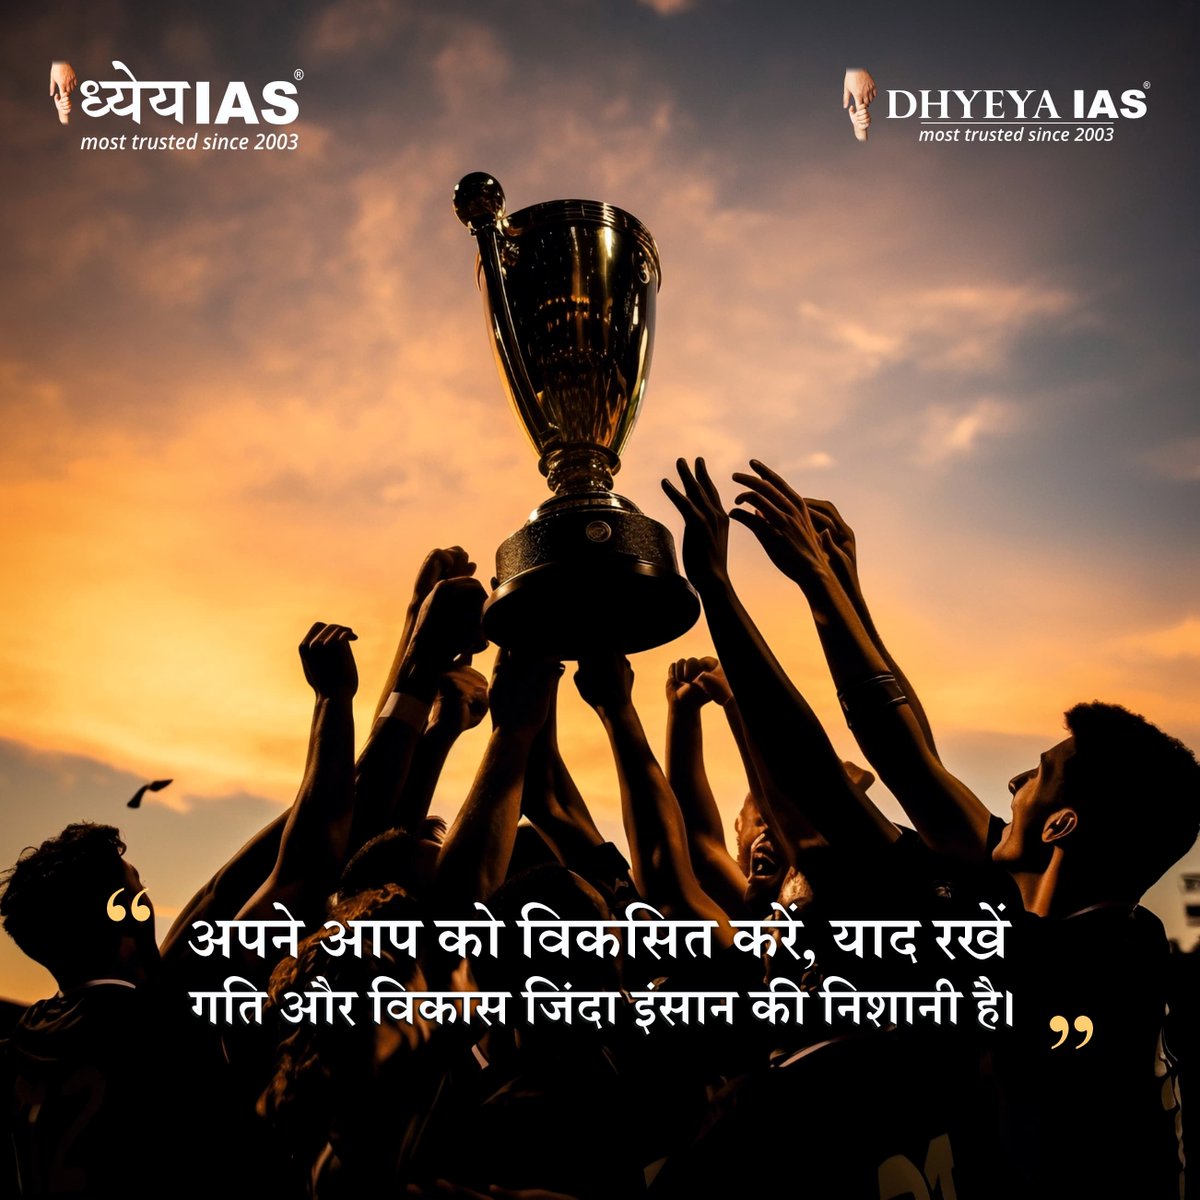 आज का विचार। 😊
Follow us for our daily motivational quotes.
#morningmotivation #growwithdhyeya #goodmorning #sucessful #sucessfulquotes #hindiquotes #morningvibes #goodmorning #morningwithdhyeya #DhyeyaIAS